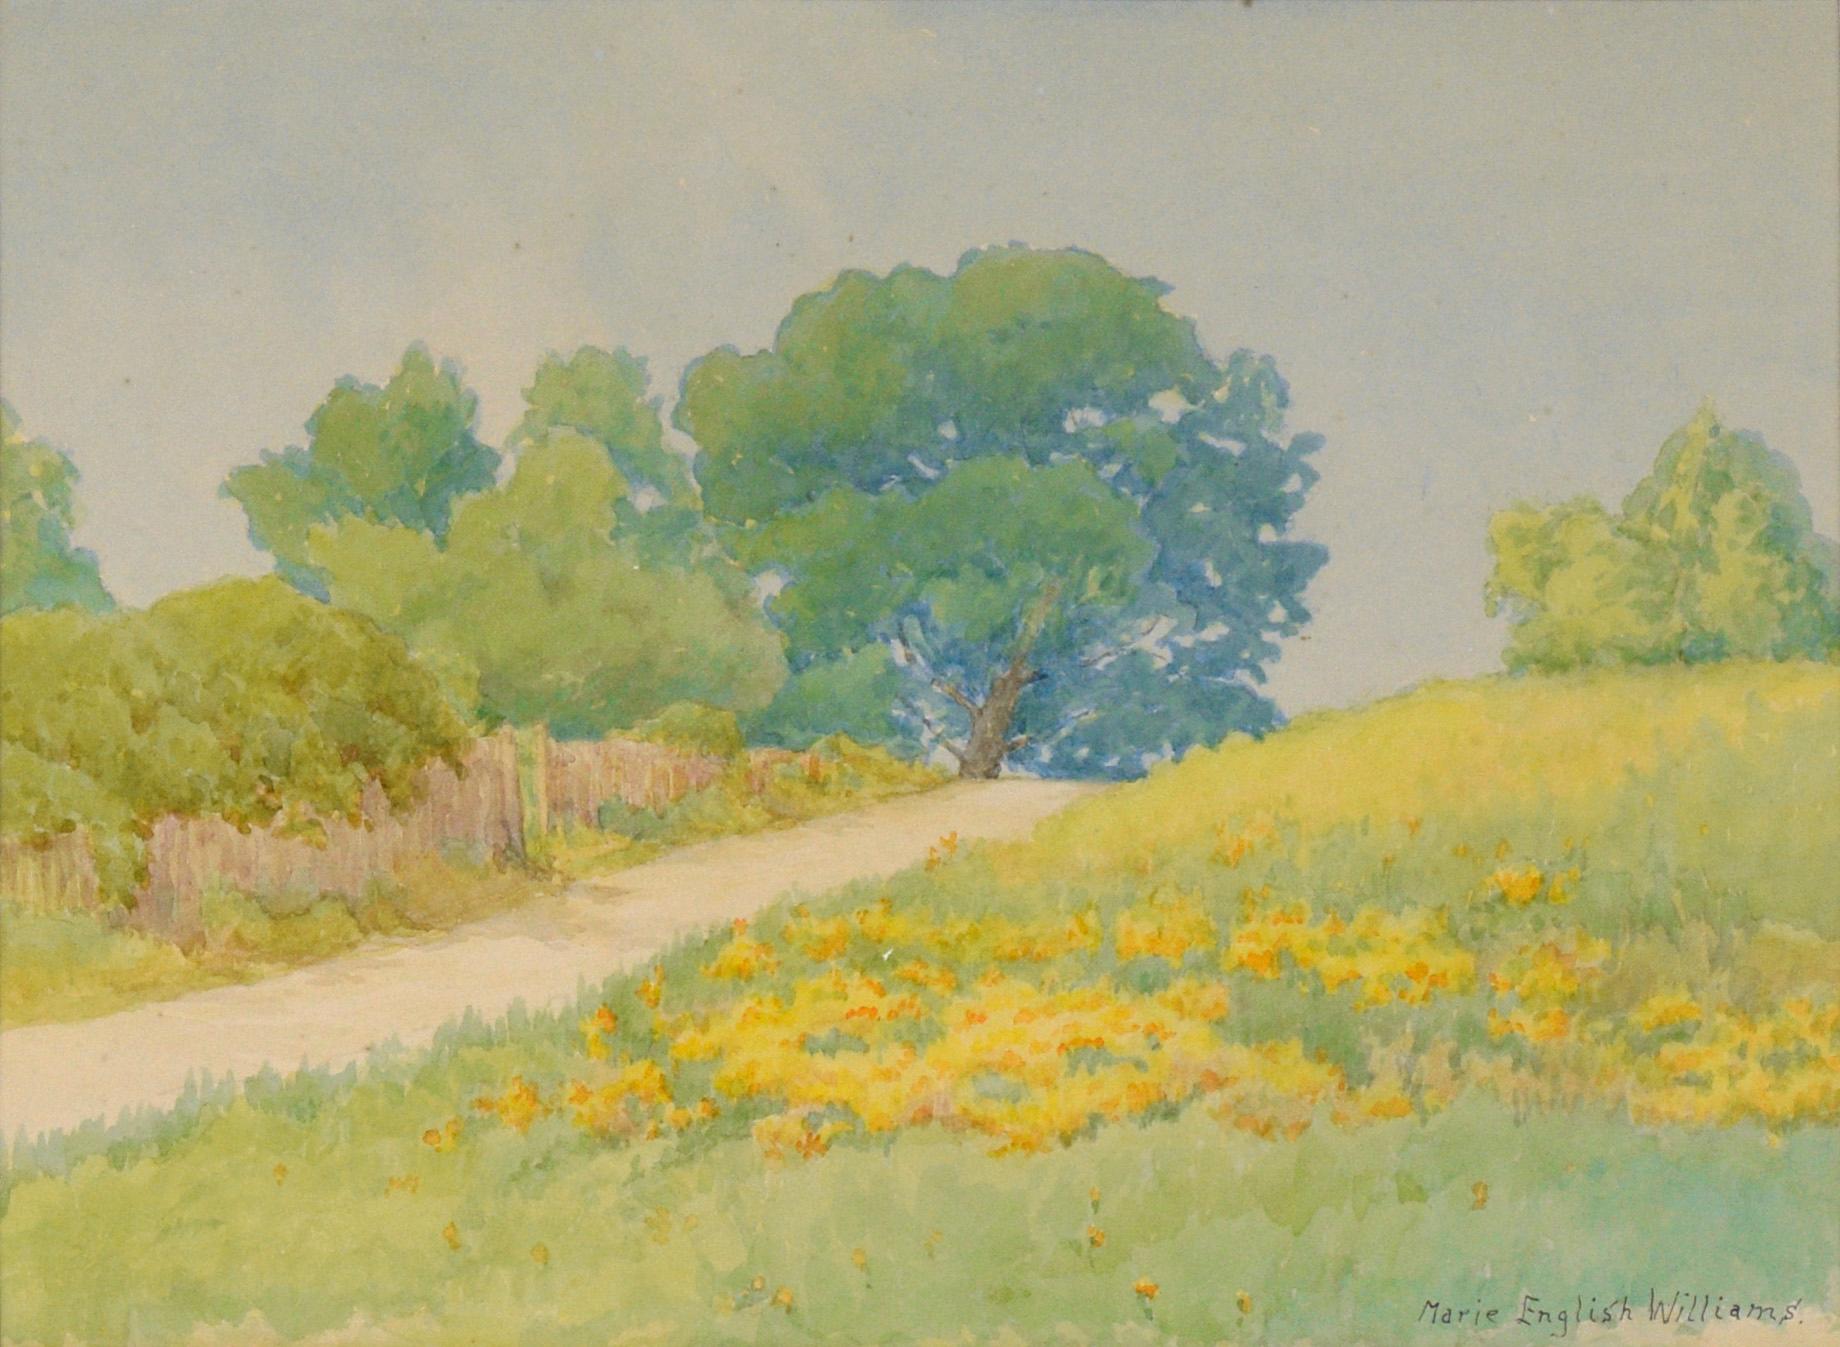 California Golden Poppies and Blue Oaks - Rural Landscape in Watercolor on Paper - Art by Marie English Williams